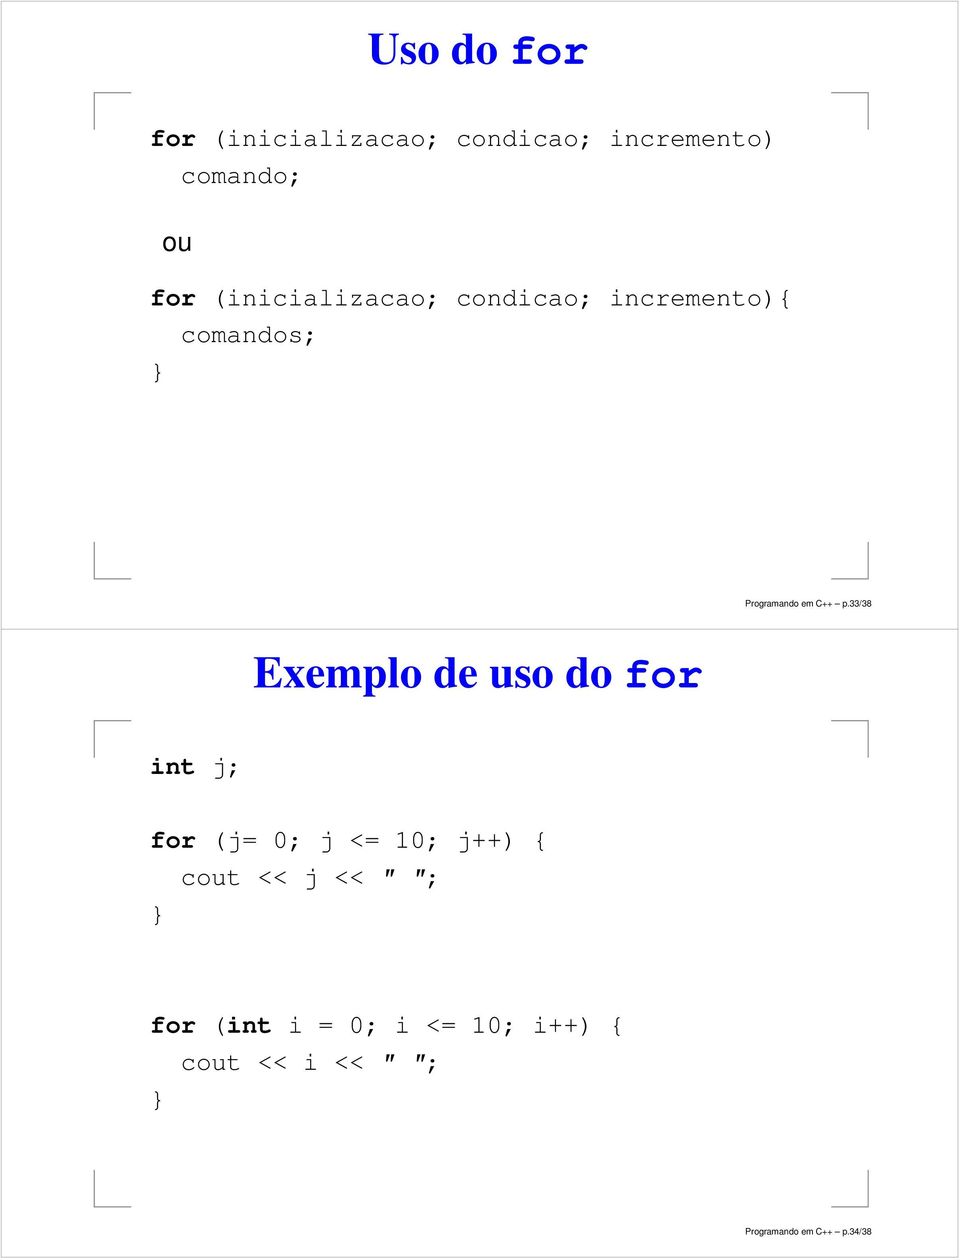 33/38 Exemplo de uso do for int j; for (j= 0; j <= 10; j++) { cout << j